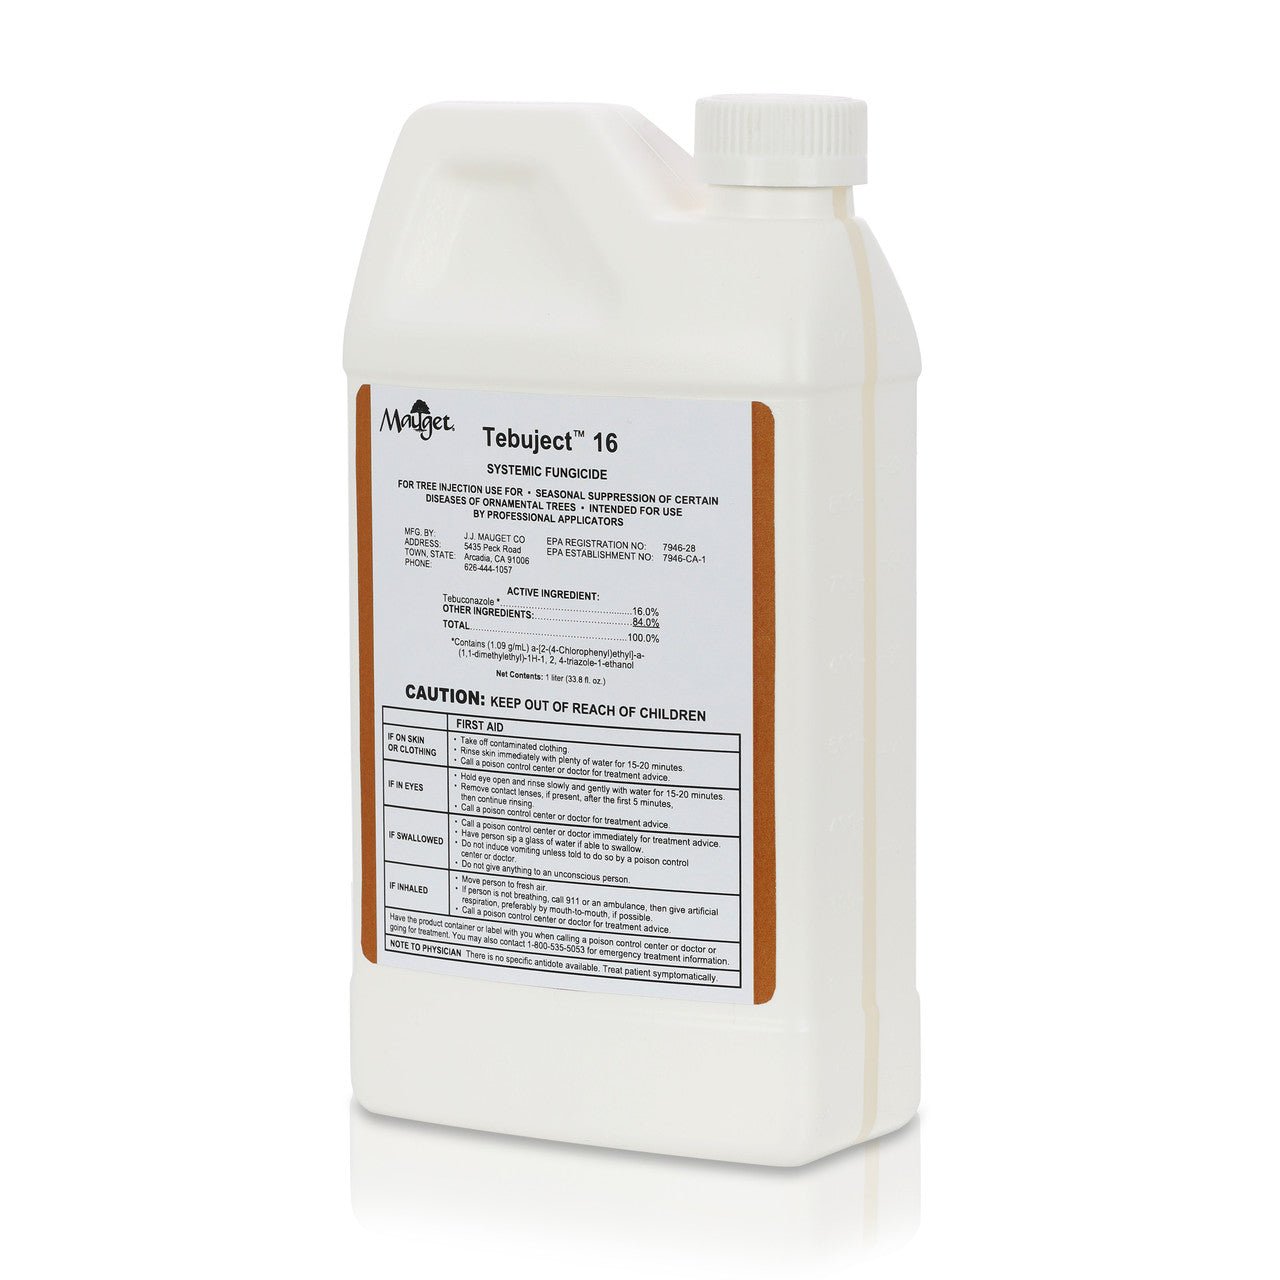 Mauget Tebuject 16 Fungicide - Tree Injection Products Co.